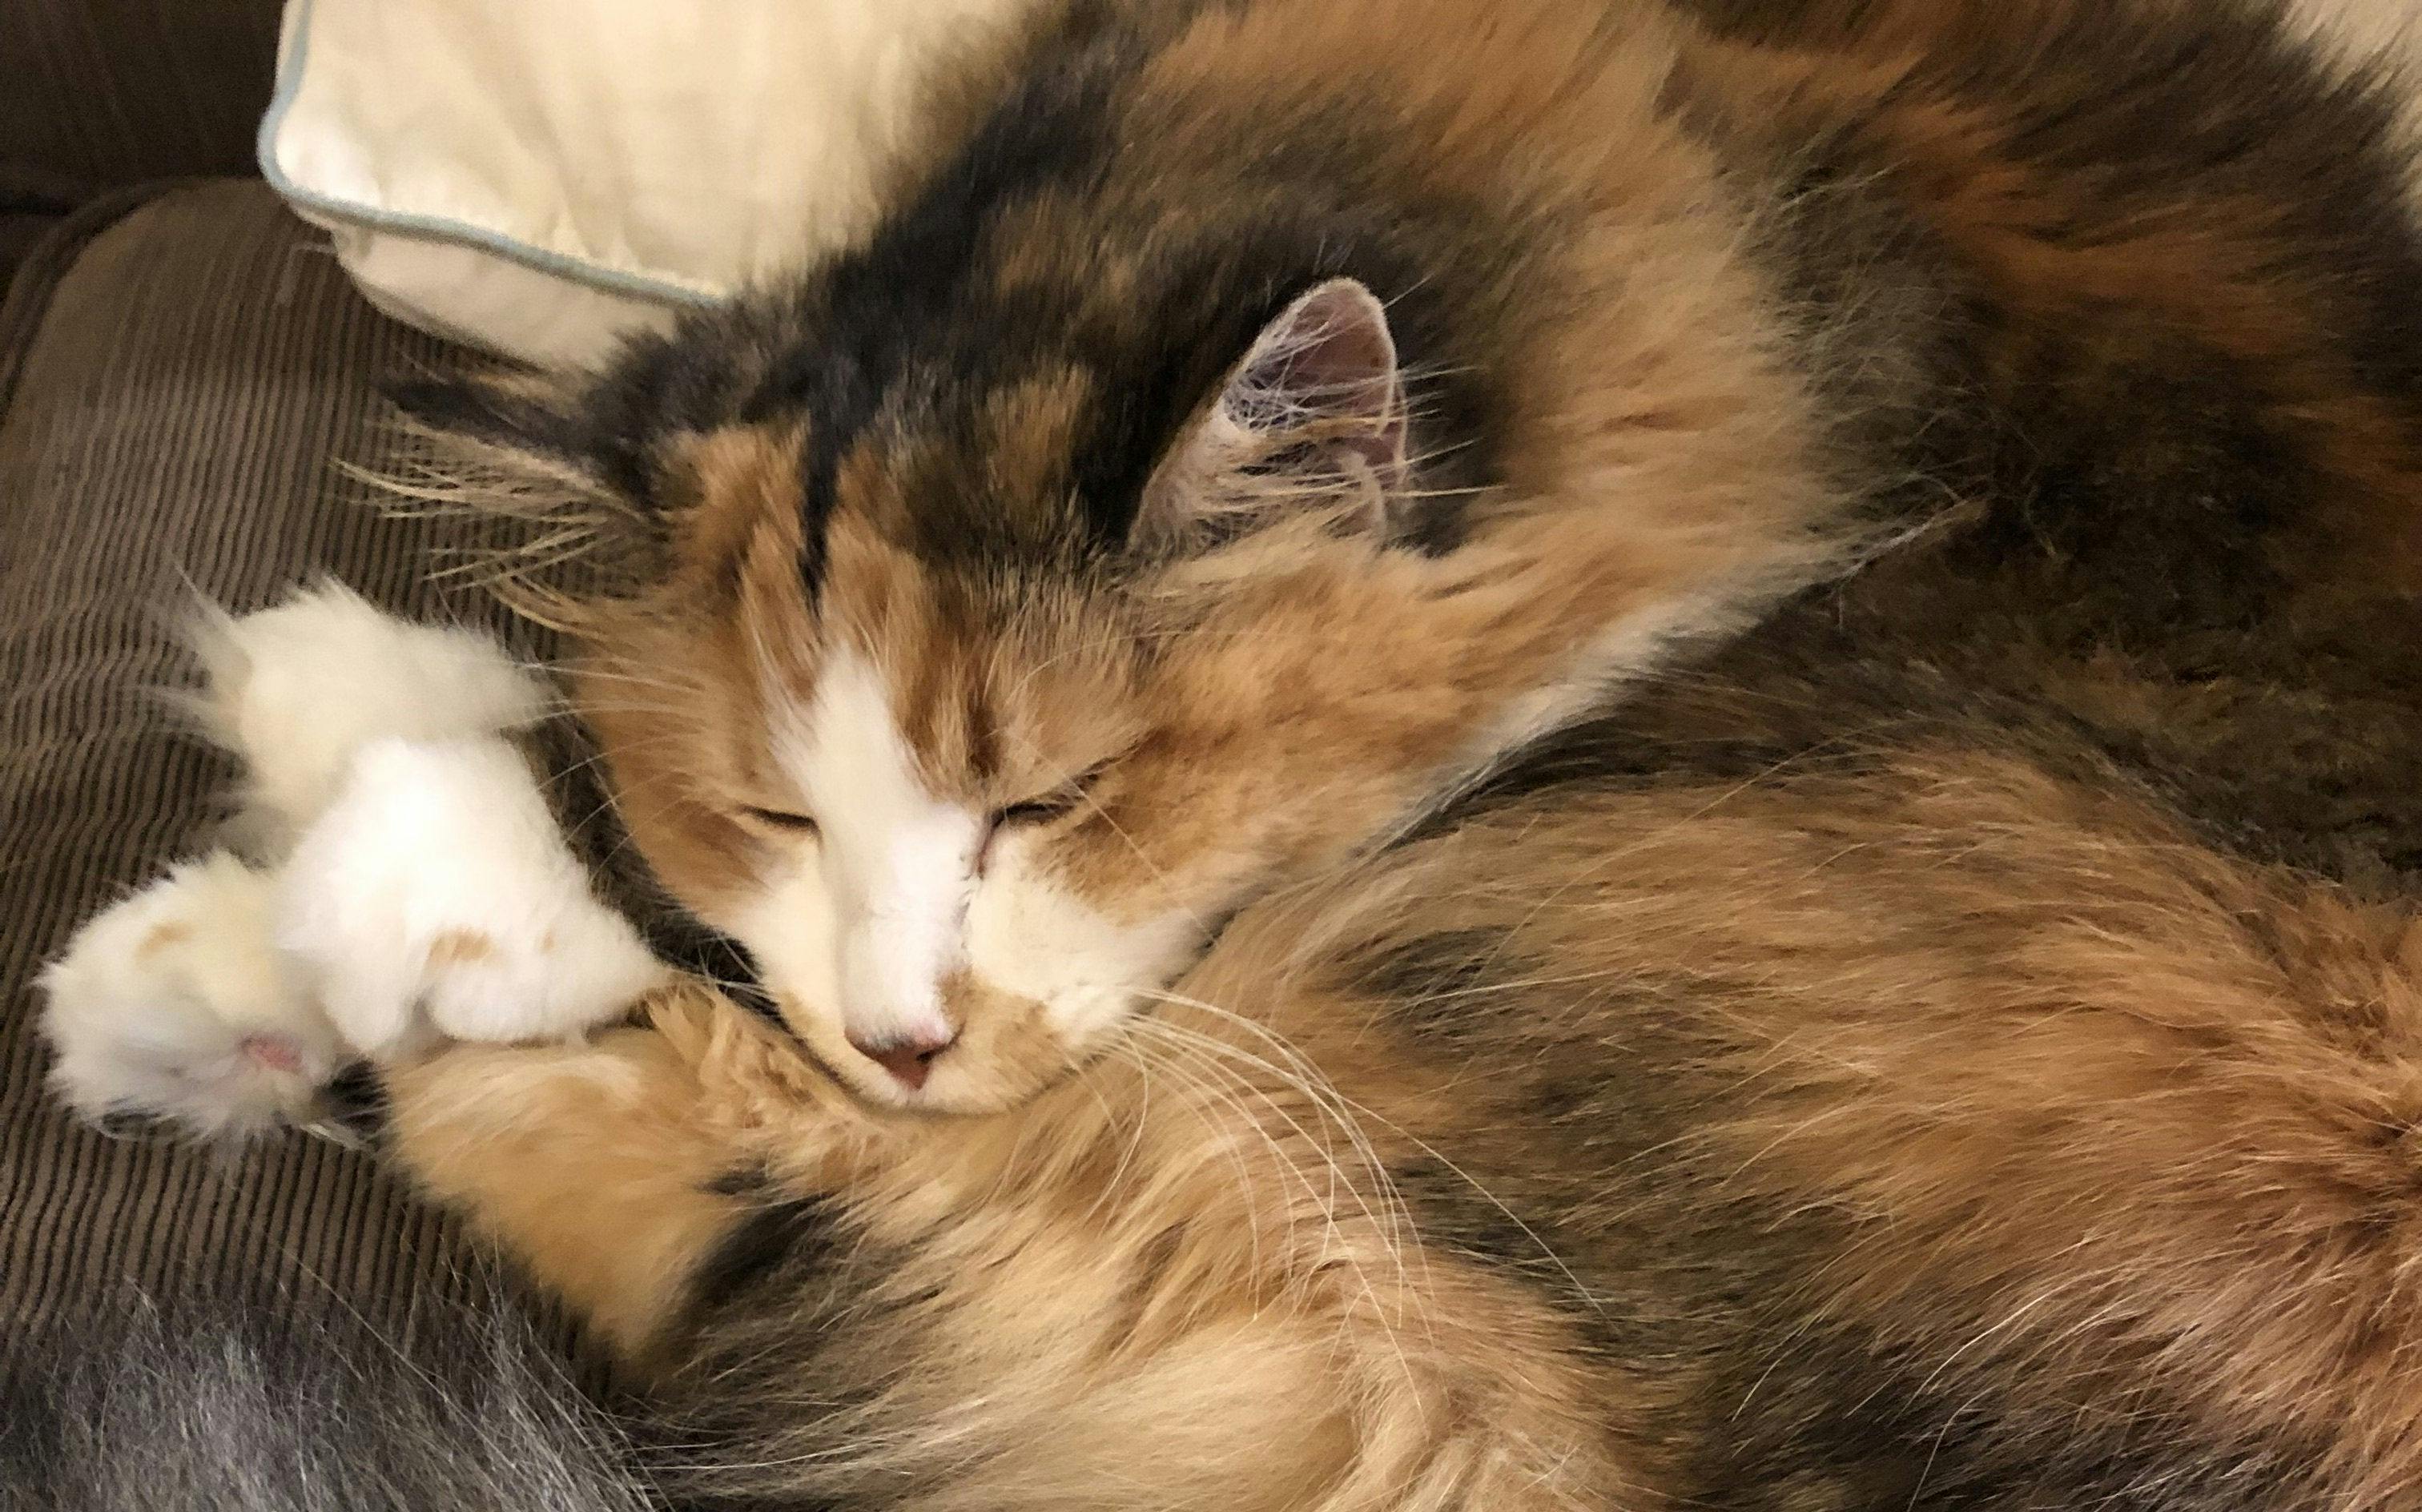 Basepaws Cat Story: In The Memory Of Lovely Lillie